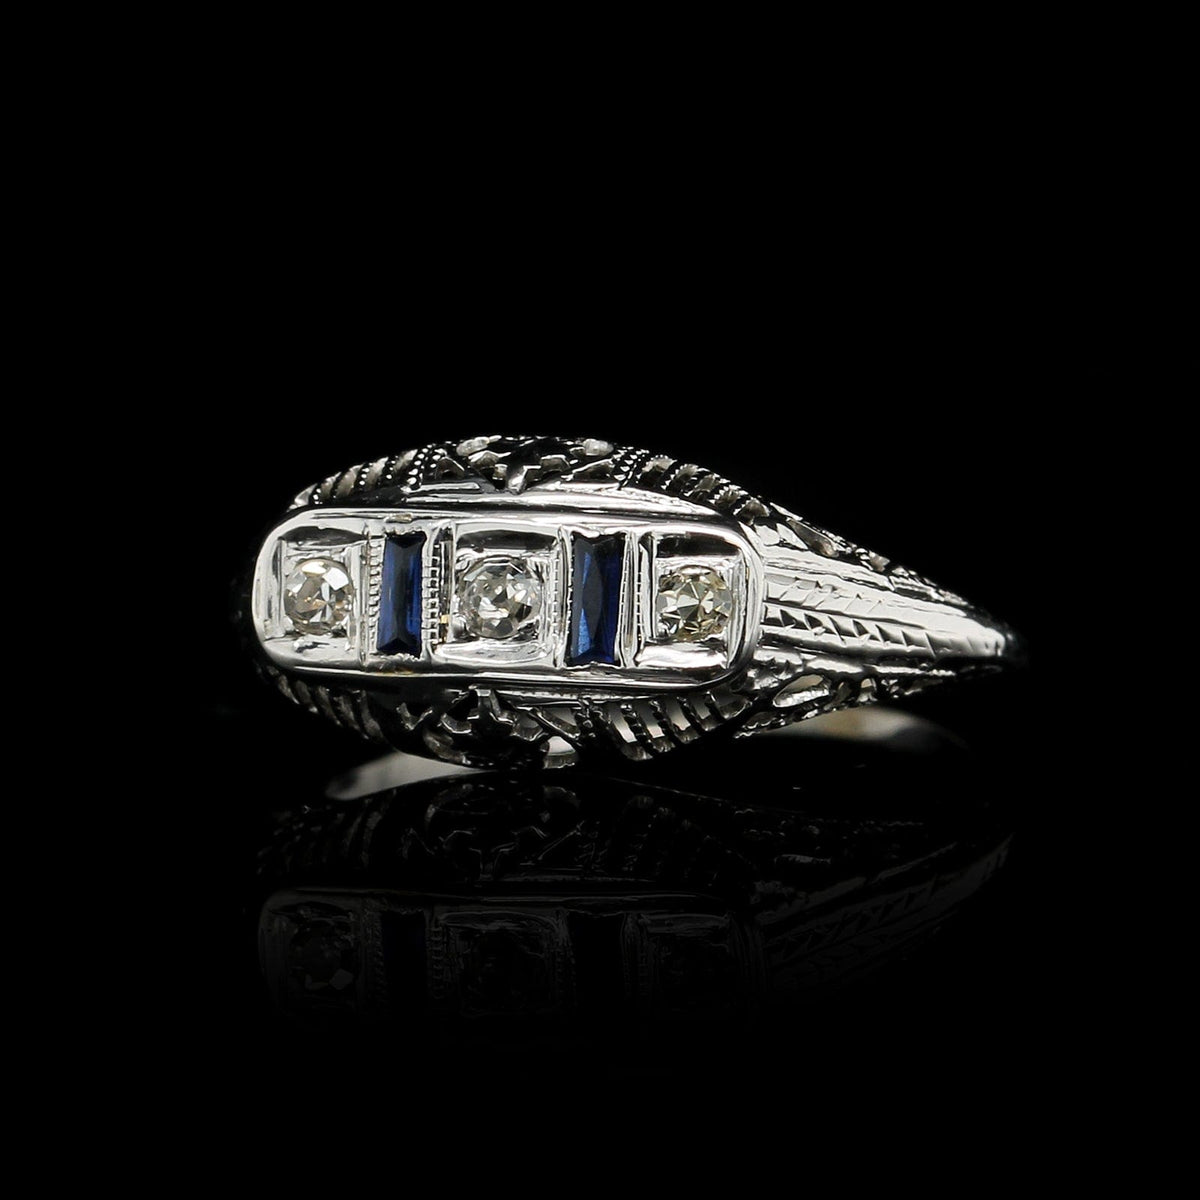 Vintage 18K White Gold Estate Diamond and Synthetic Sapphire Ring